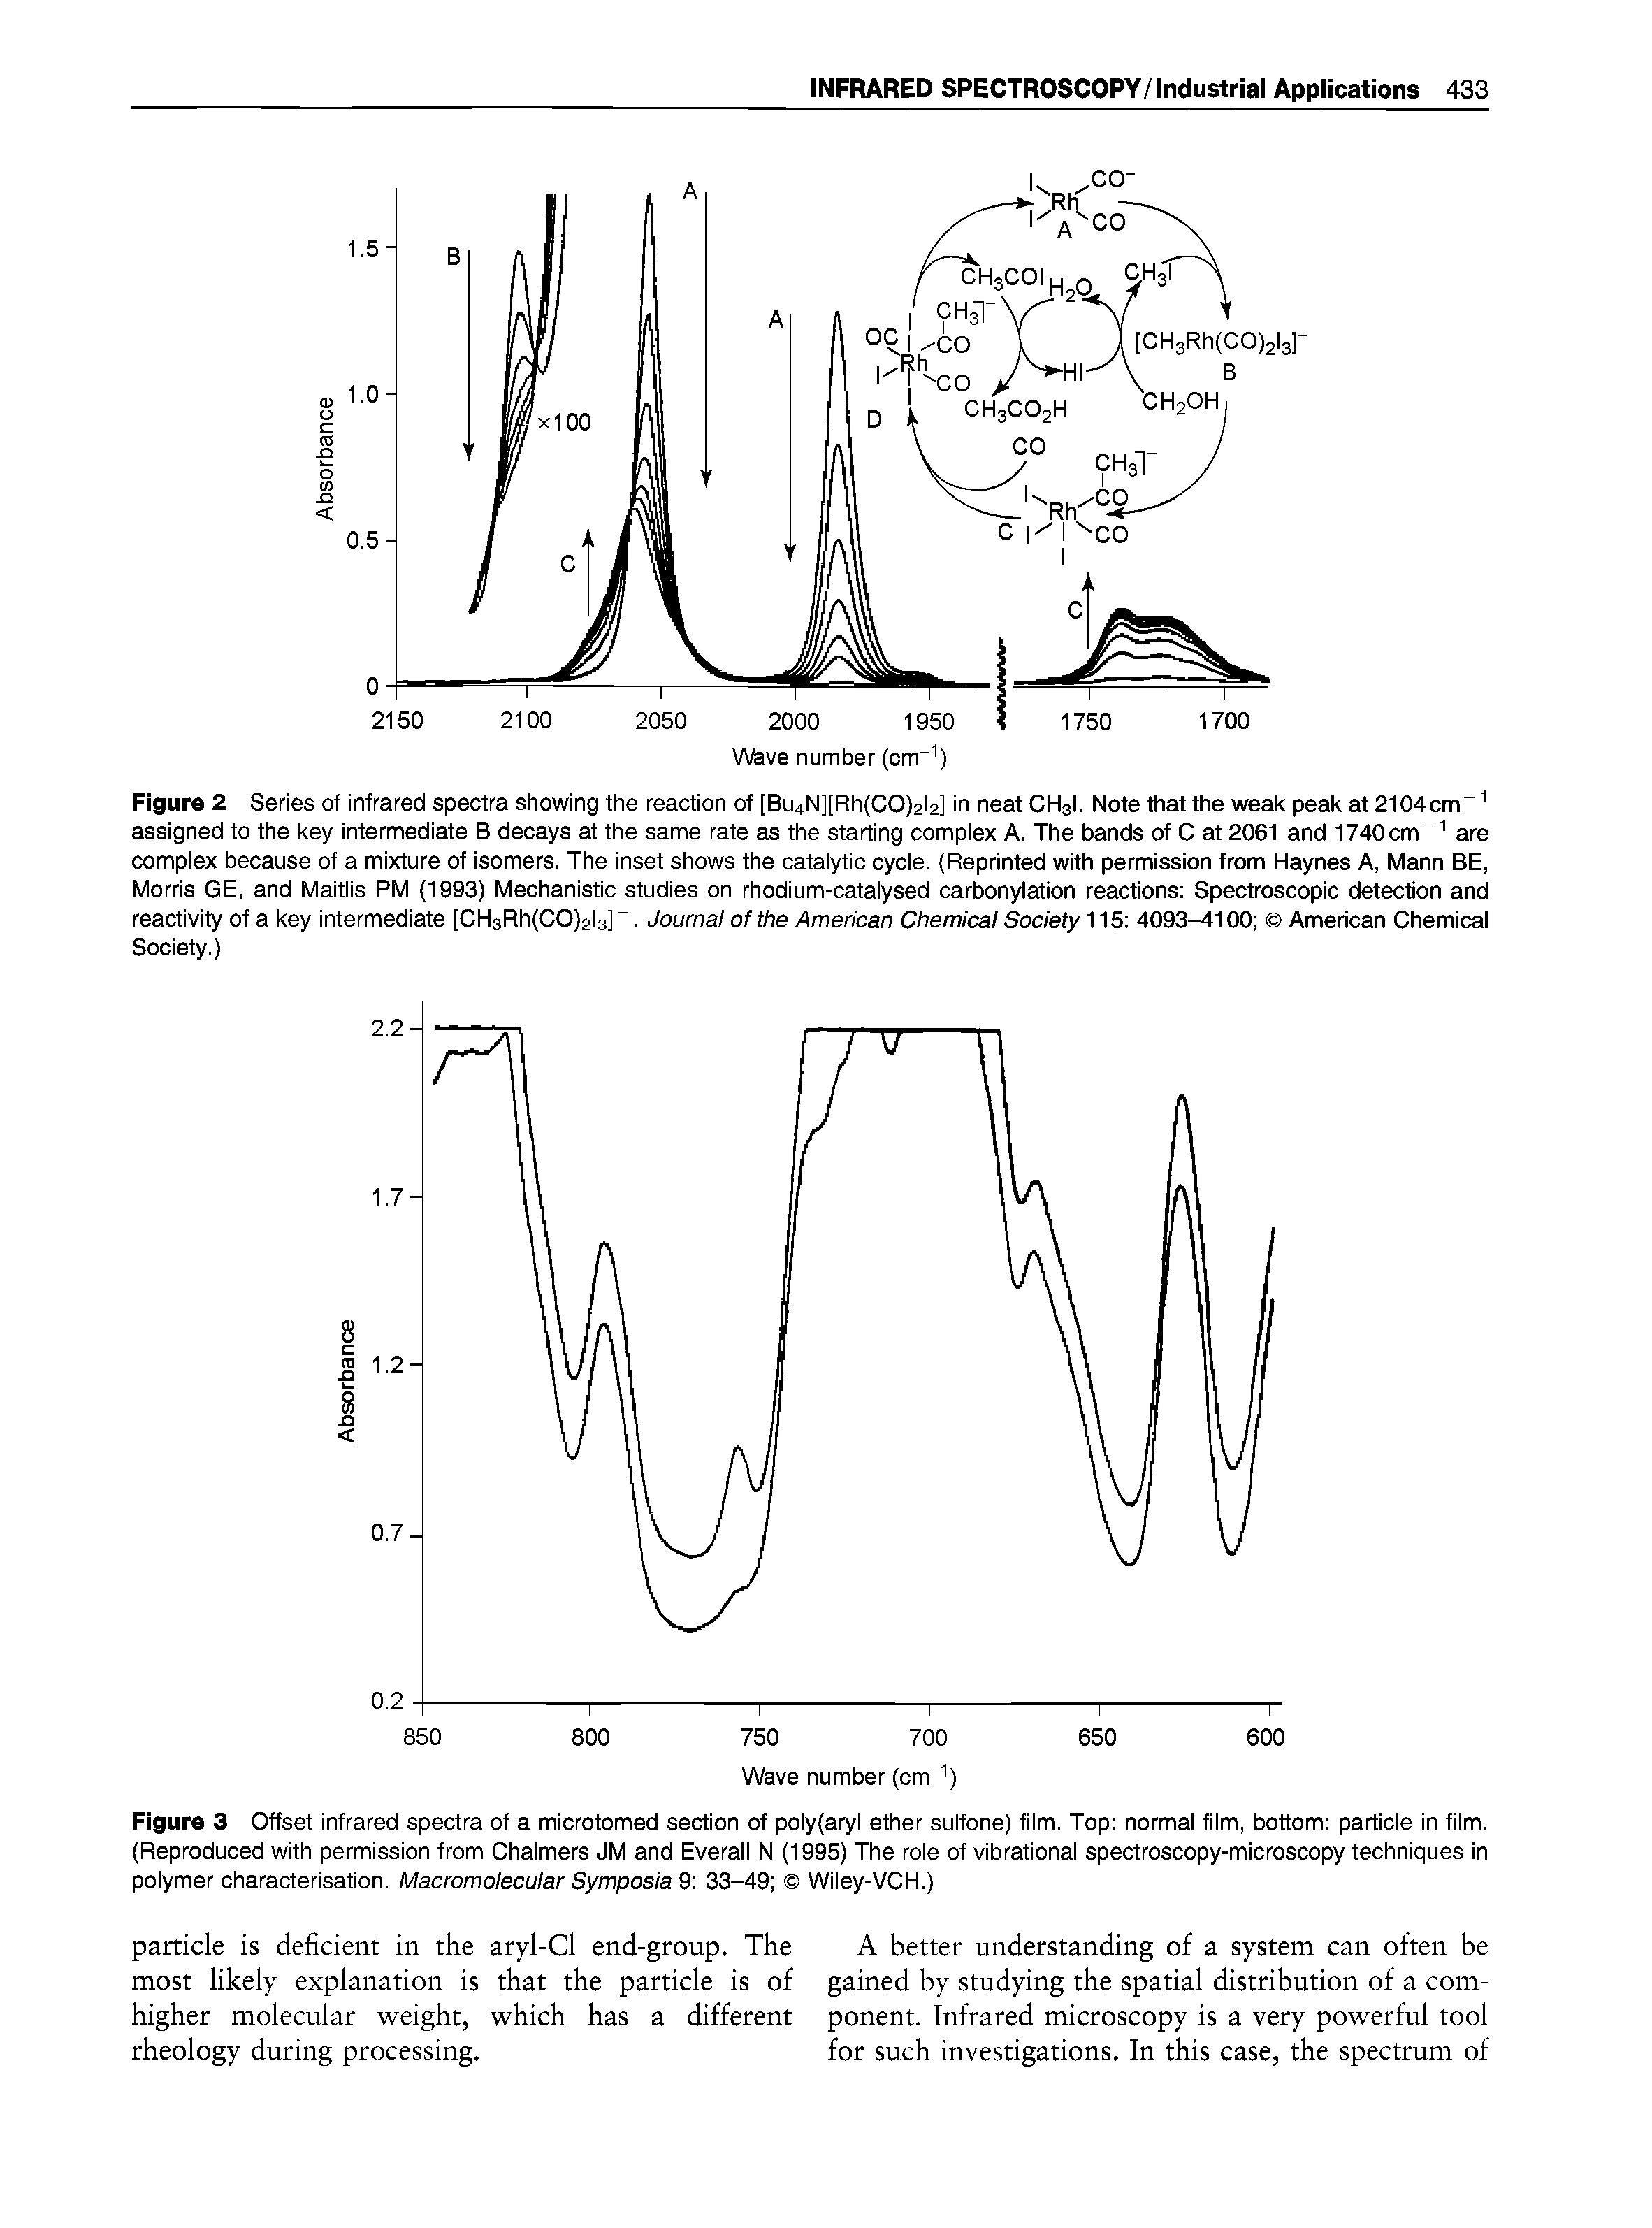 Figure 3 Offset infrared spectra of a microtomed section of poly(aryl ether sulfone) film. Top normal film, bottom particle in film. (Reproduced with permission from Chalmers JM and Everall N (1995) The role of vibrational spectroscopy-microscopy techniques in polymer characterisation. Macromoiecuiar Symposia 9 33-49 Wiley-VCH.)...